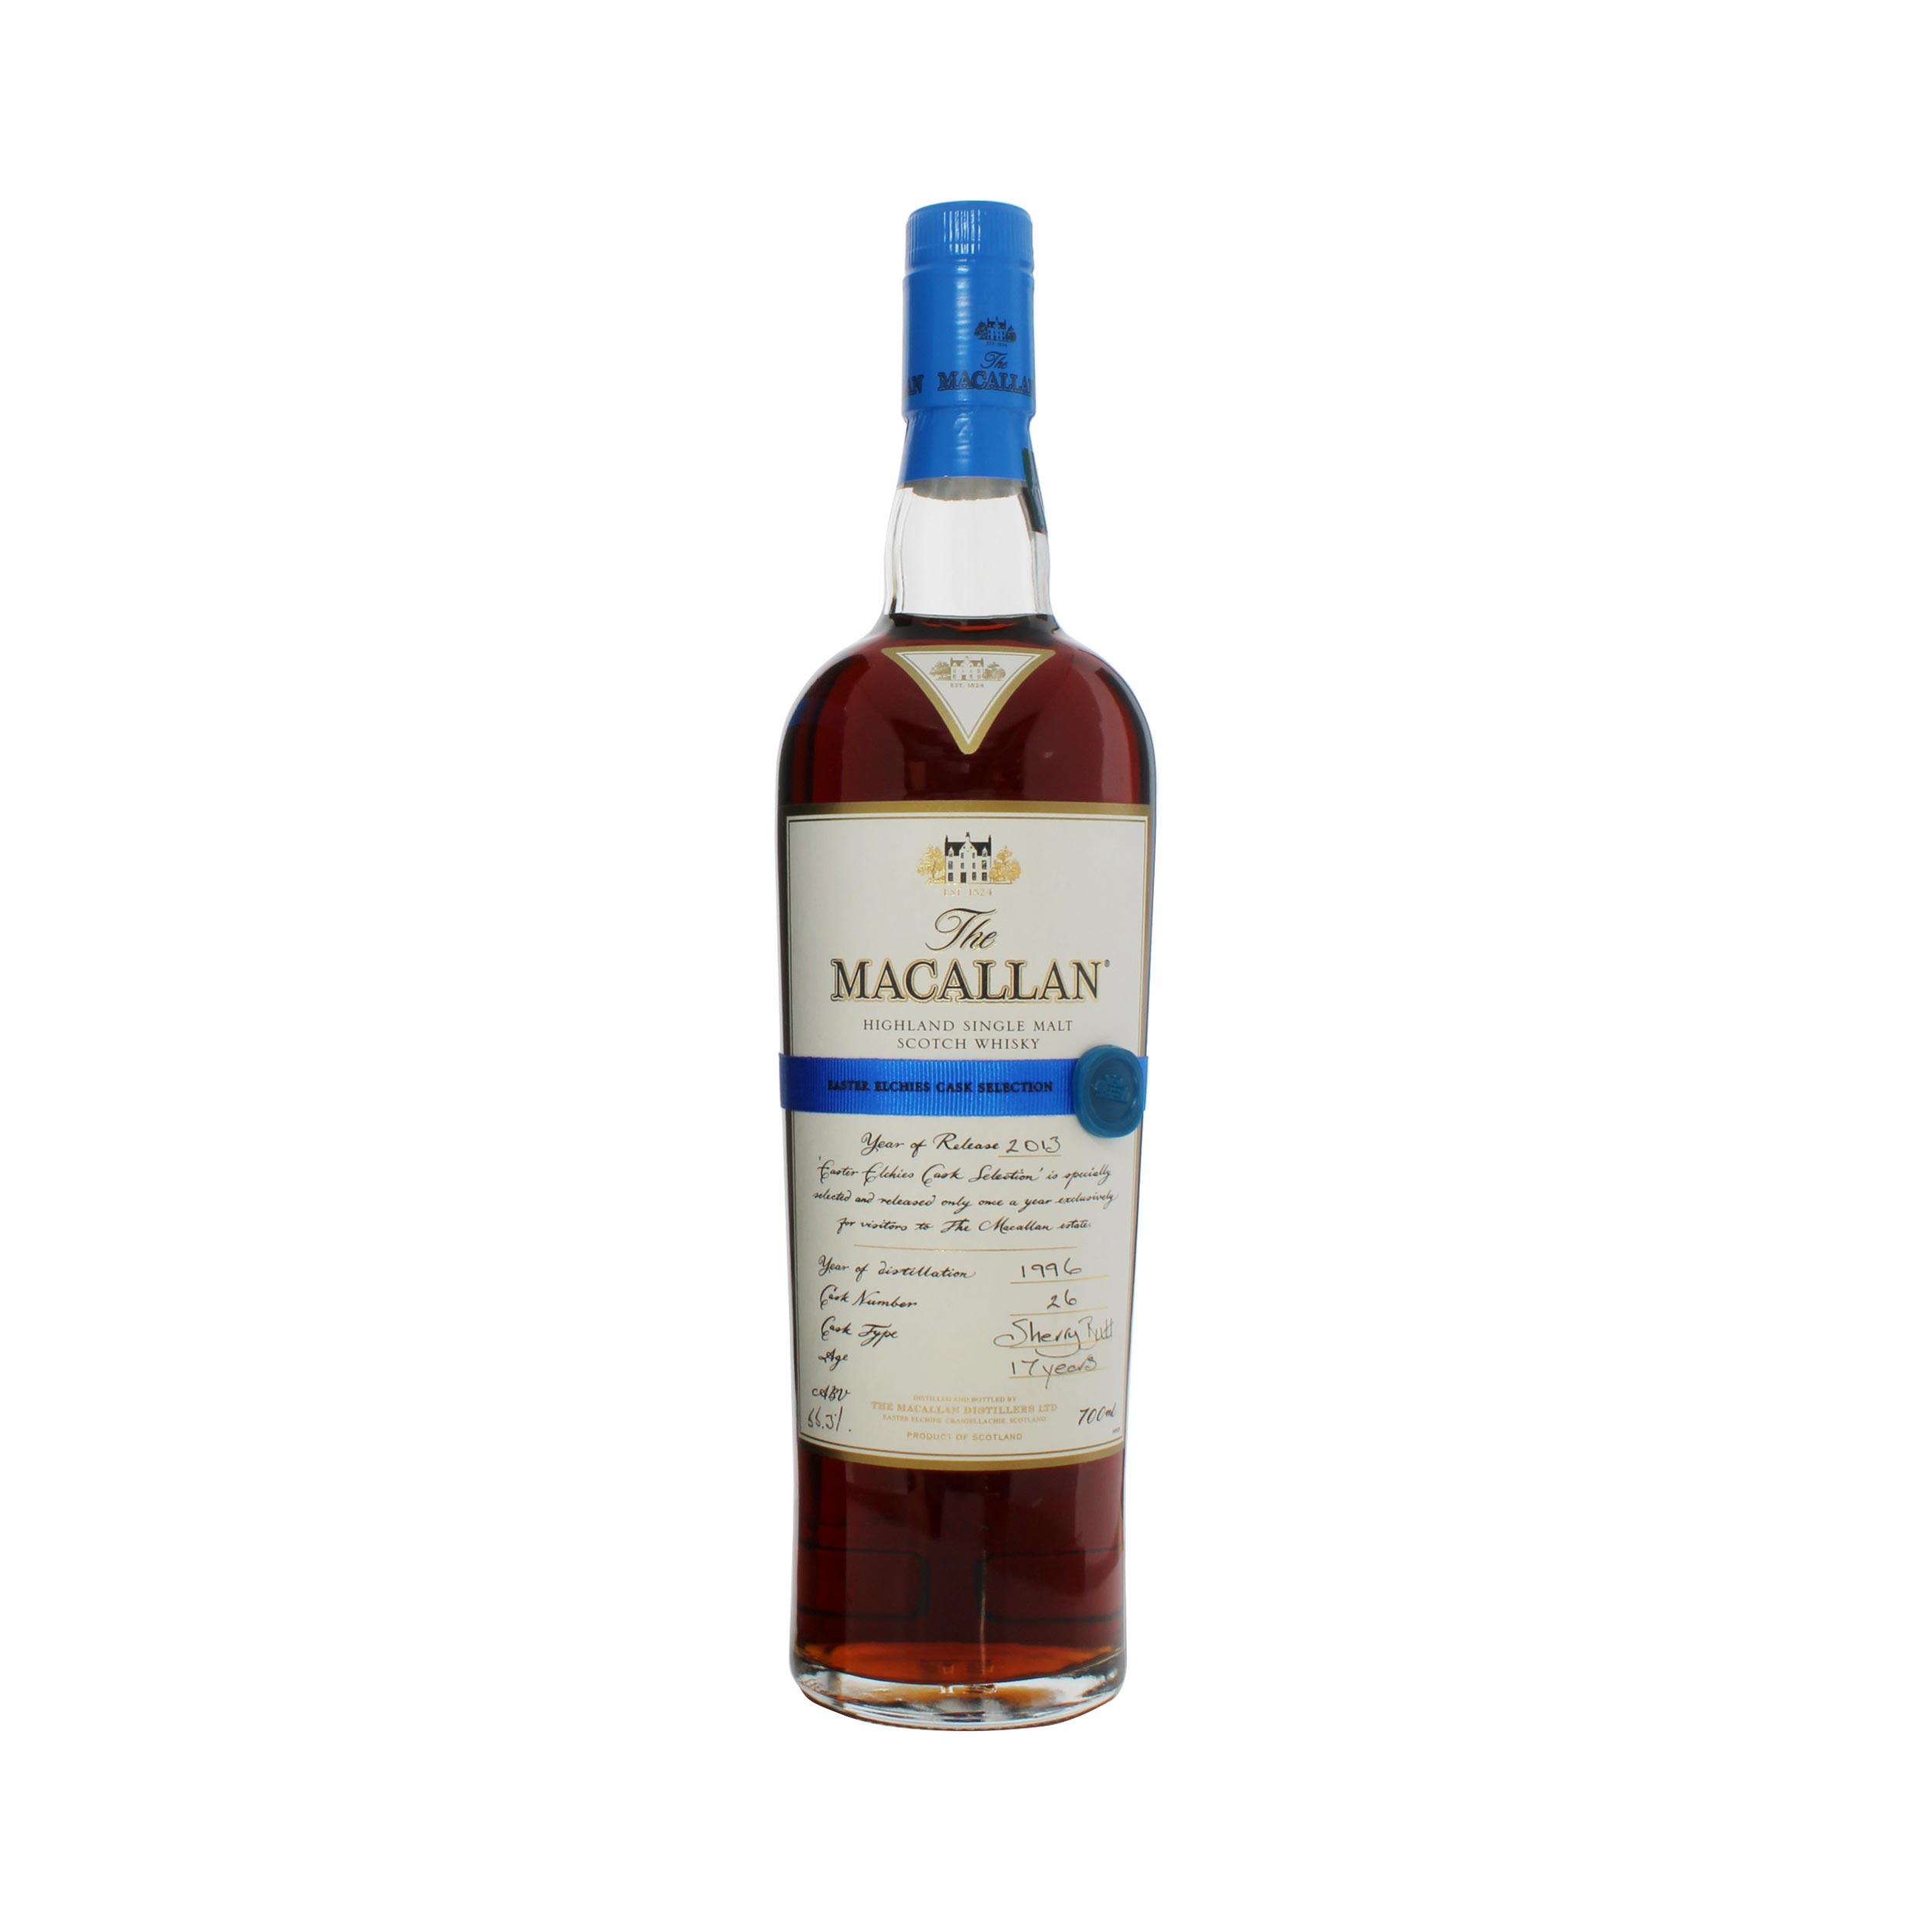 Macallan 1996 Easter Elchies 2013 17 Year Old.